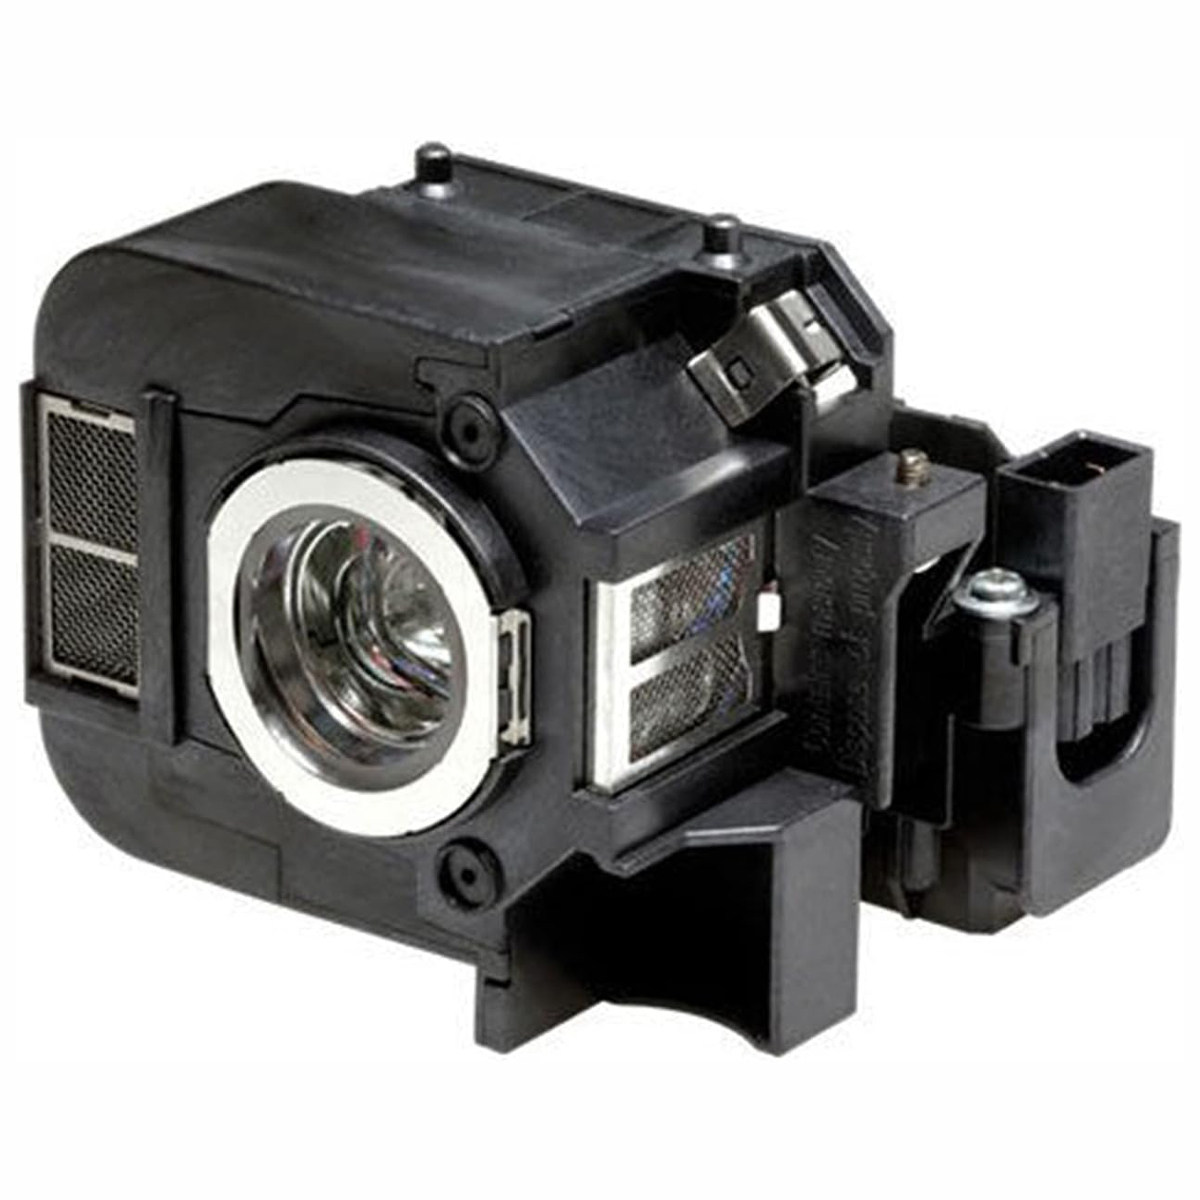 Replacement Projector lamp ELPLP50 For Epson EB-824 EB-824H EB-825 EB-825H EB-826W